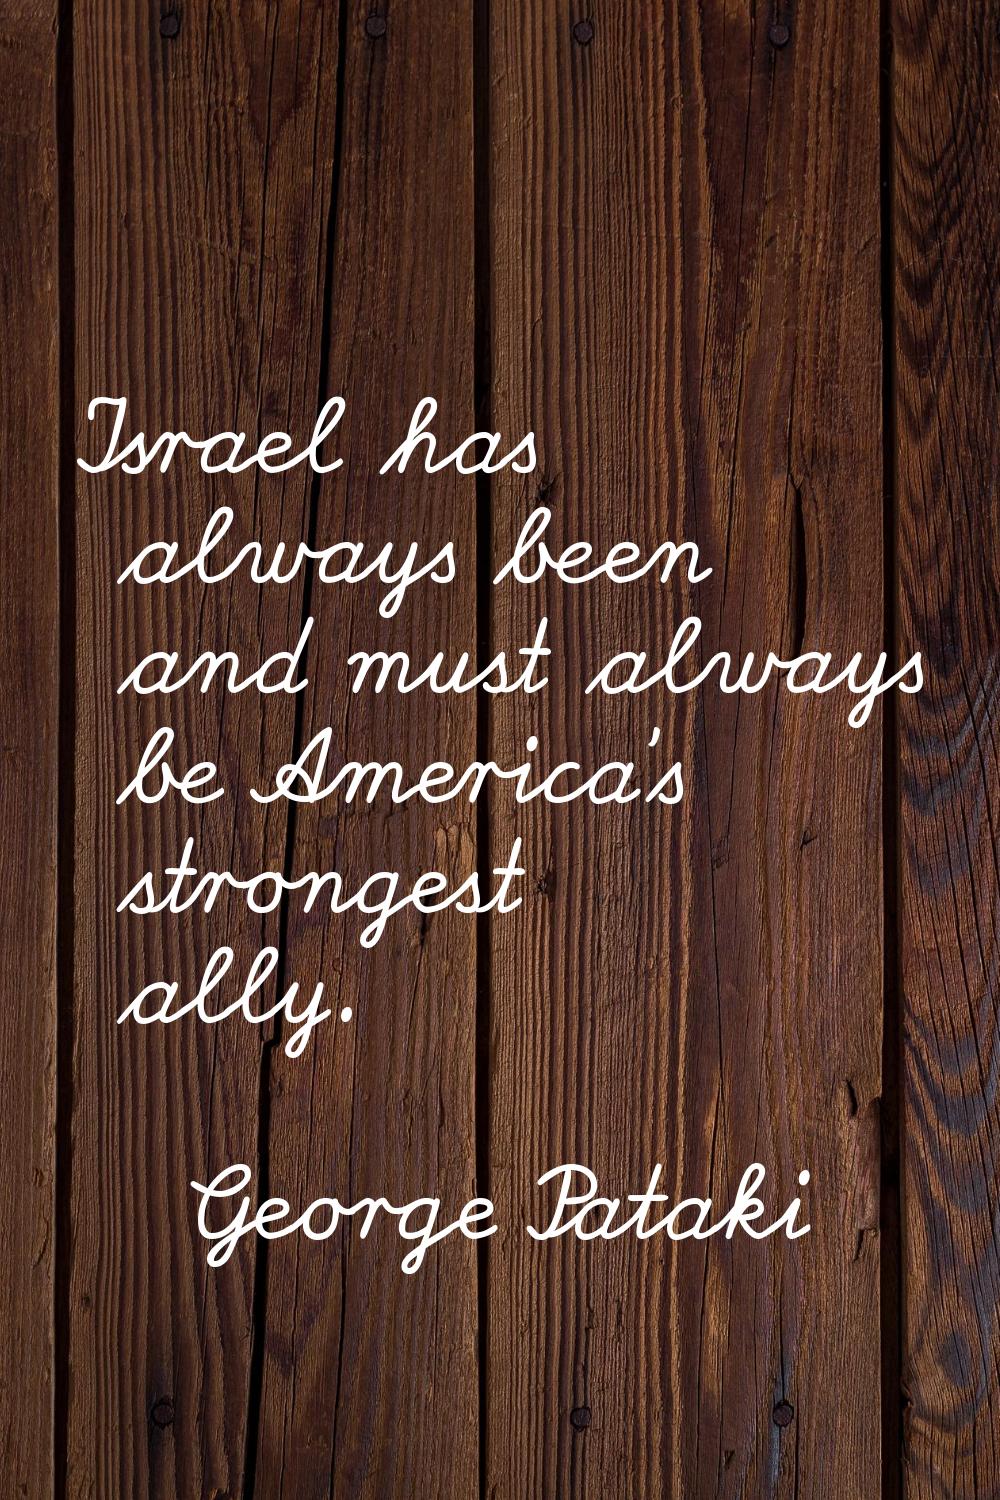 Israel has always been and must always be America's strongest ally.